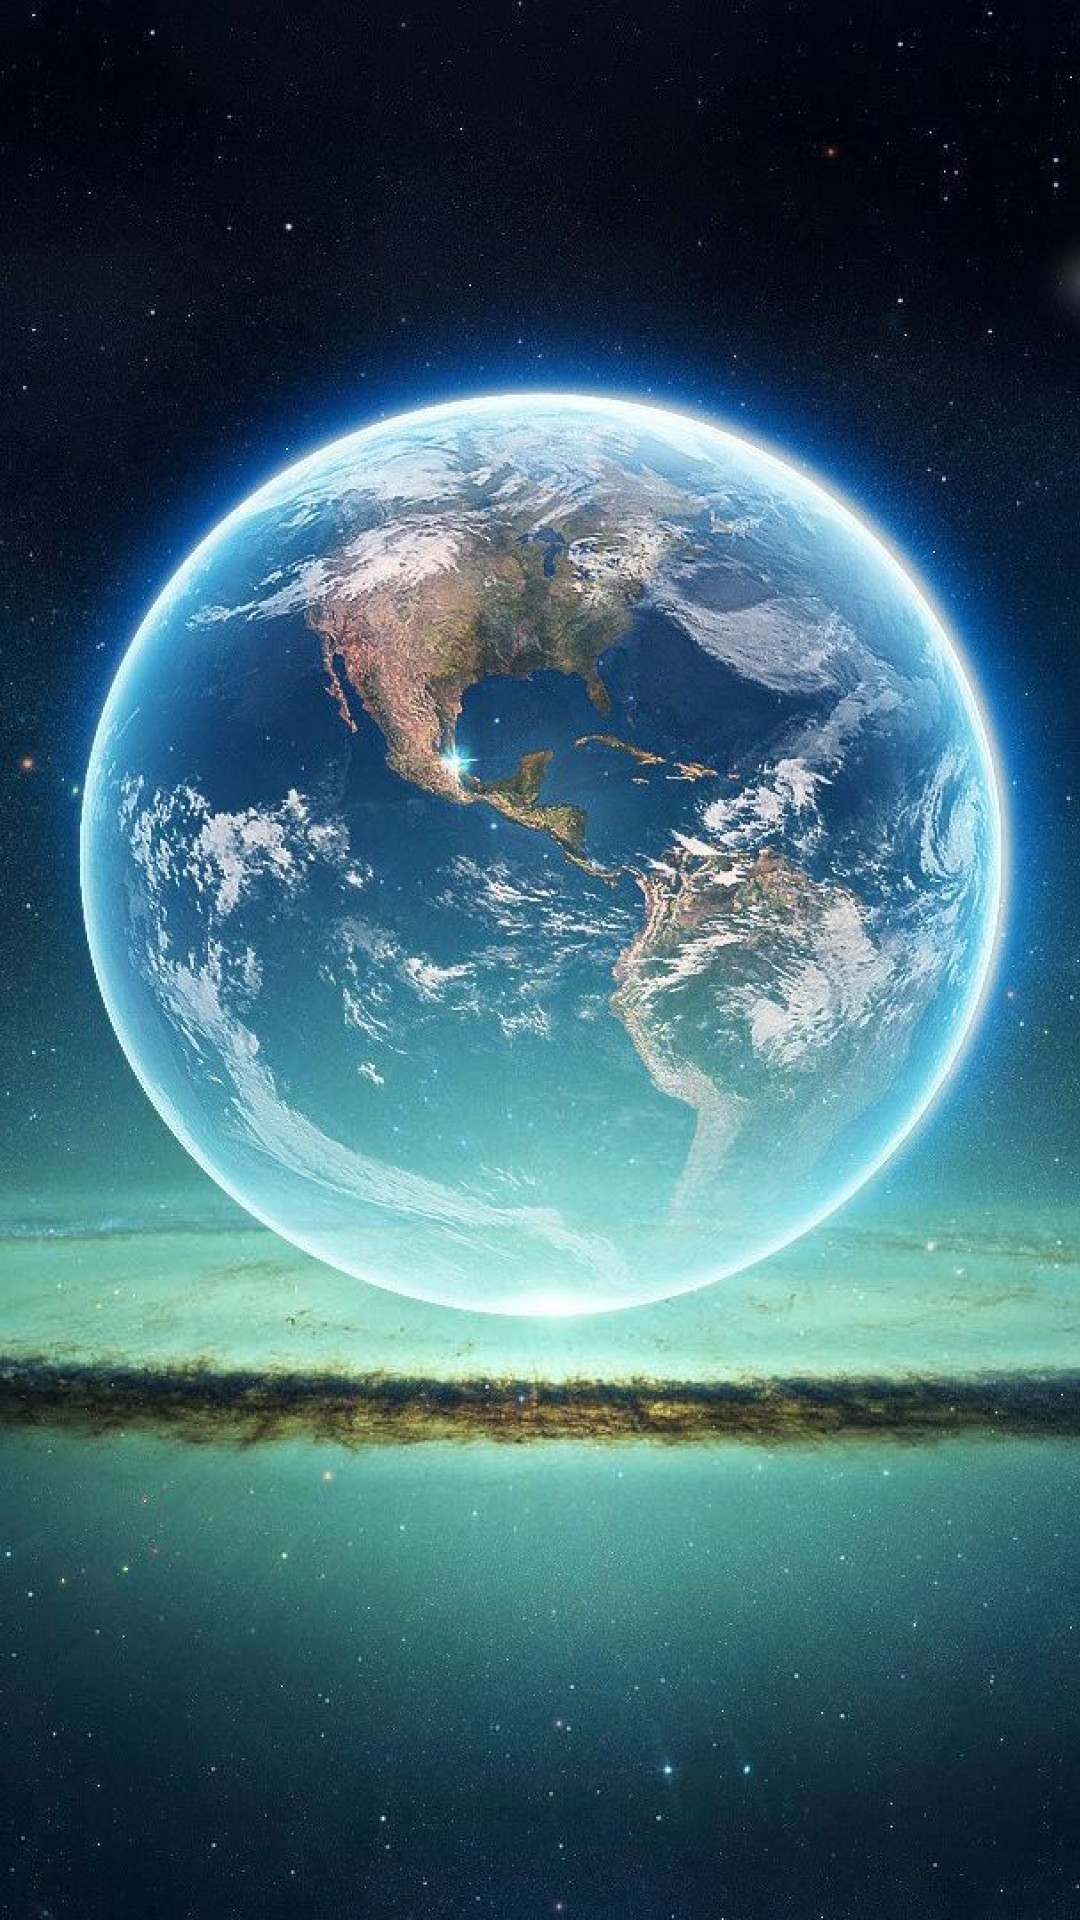 Wallpaperwiki Free Earth iPhone Image Download Pic